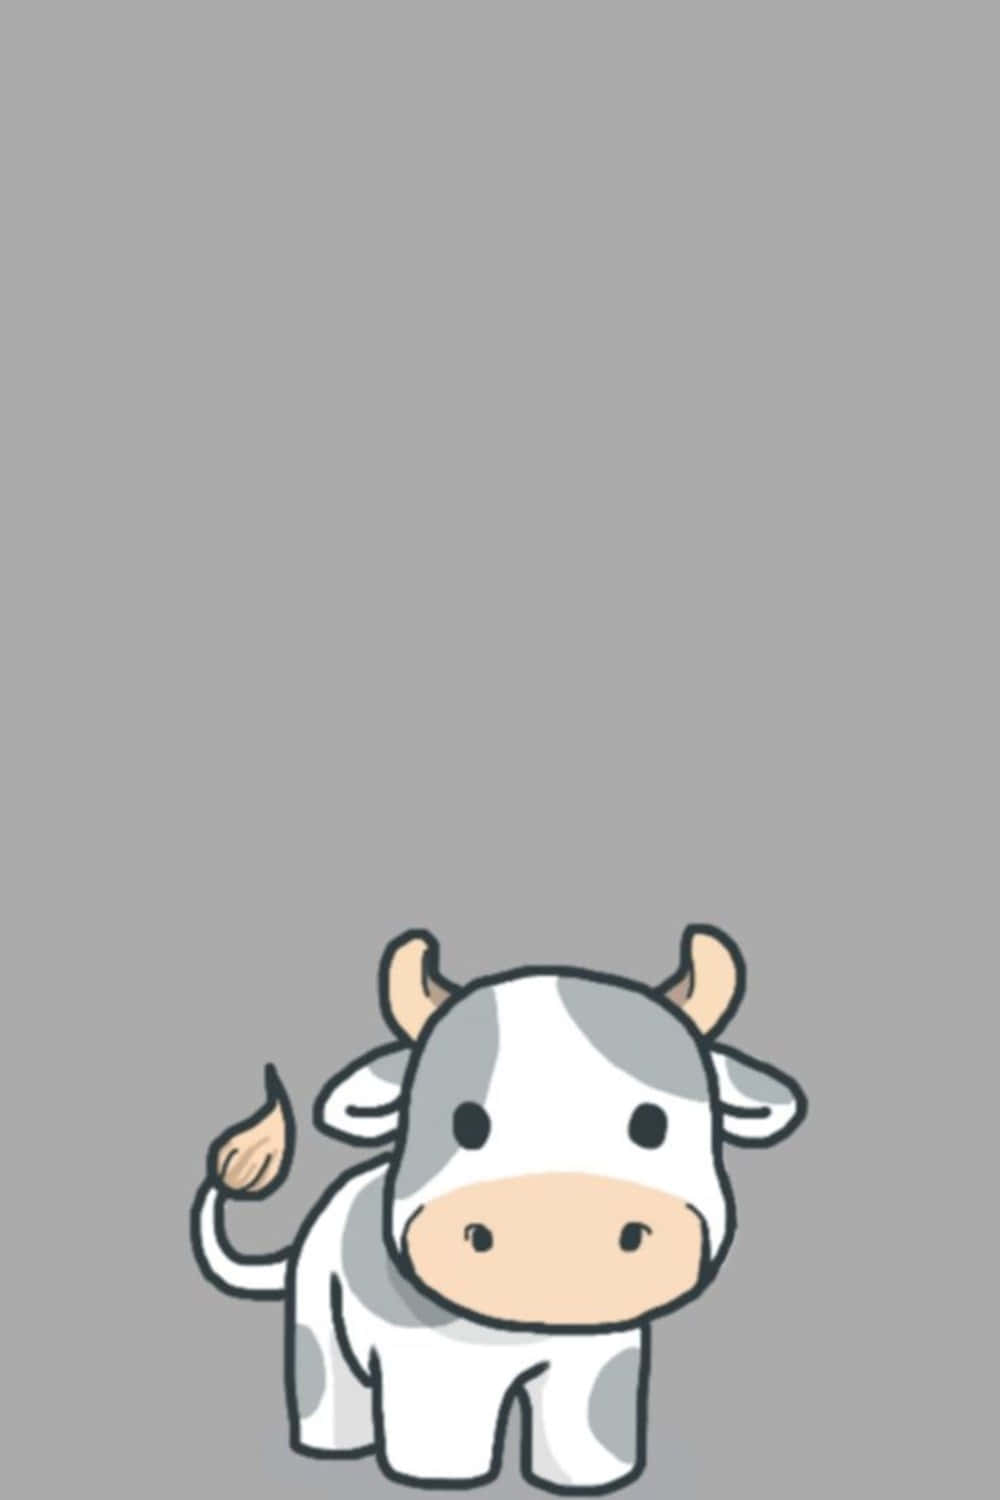 IPhone wallpaper of a cute cartoon cow on a grey background - Cow